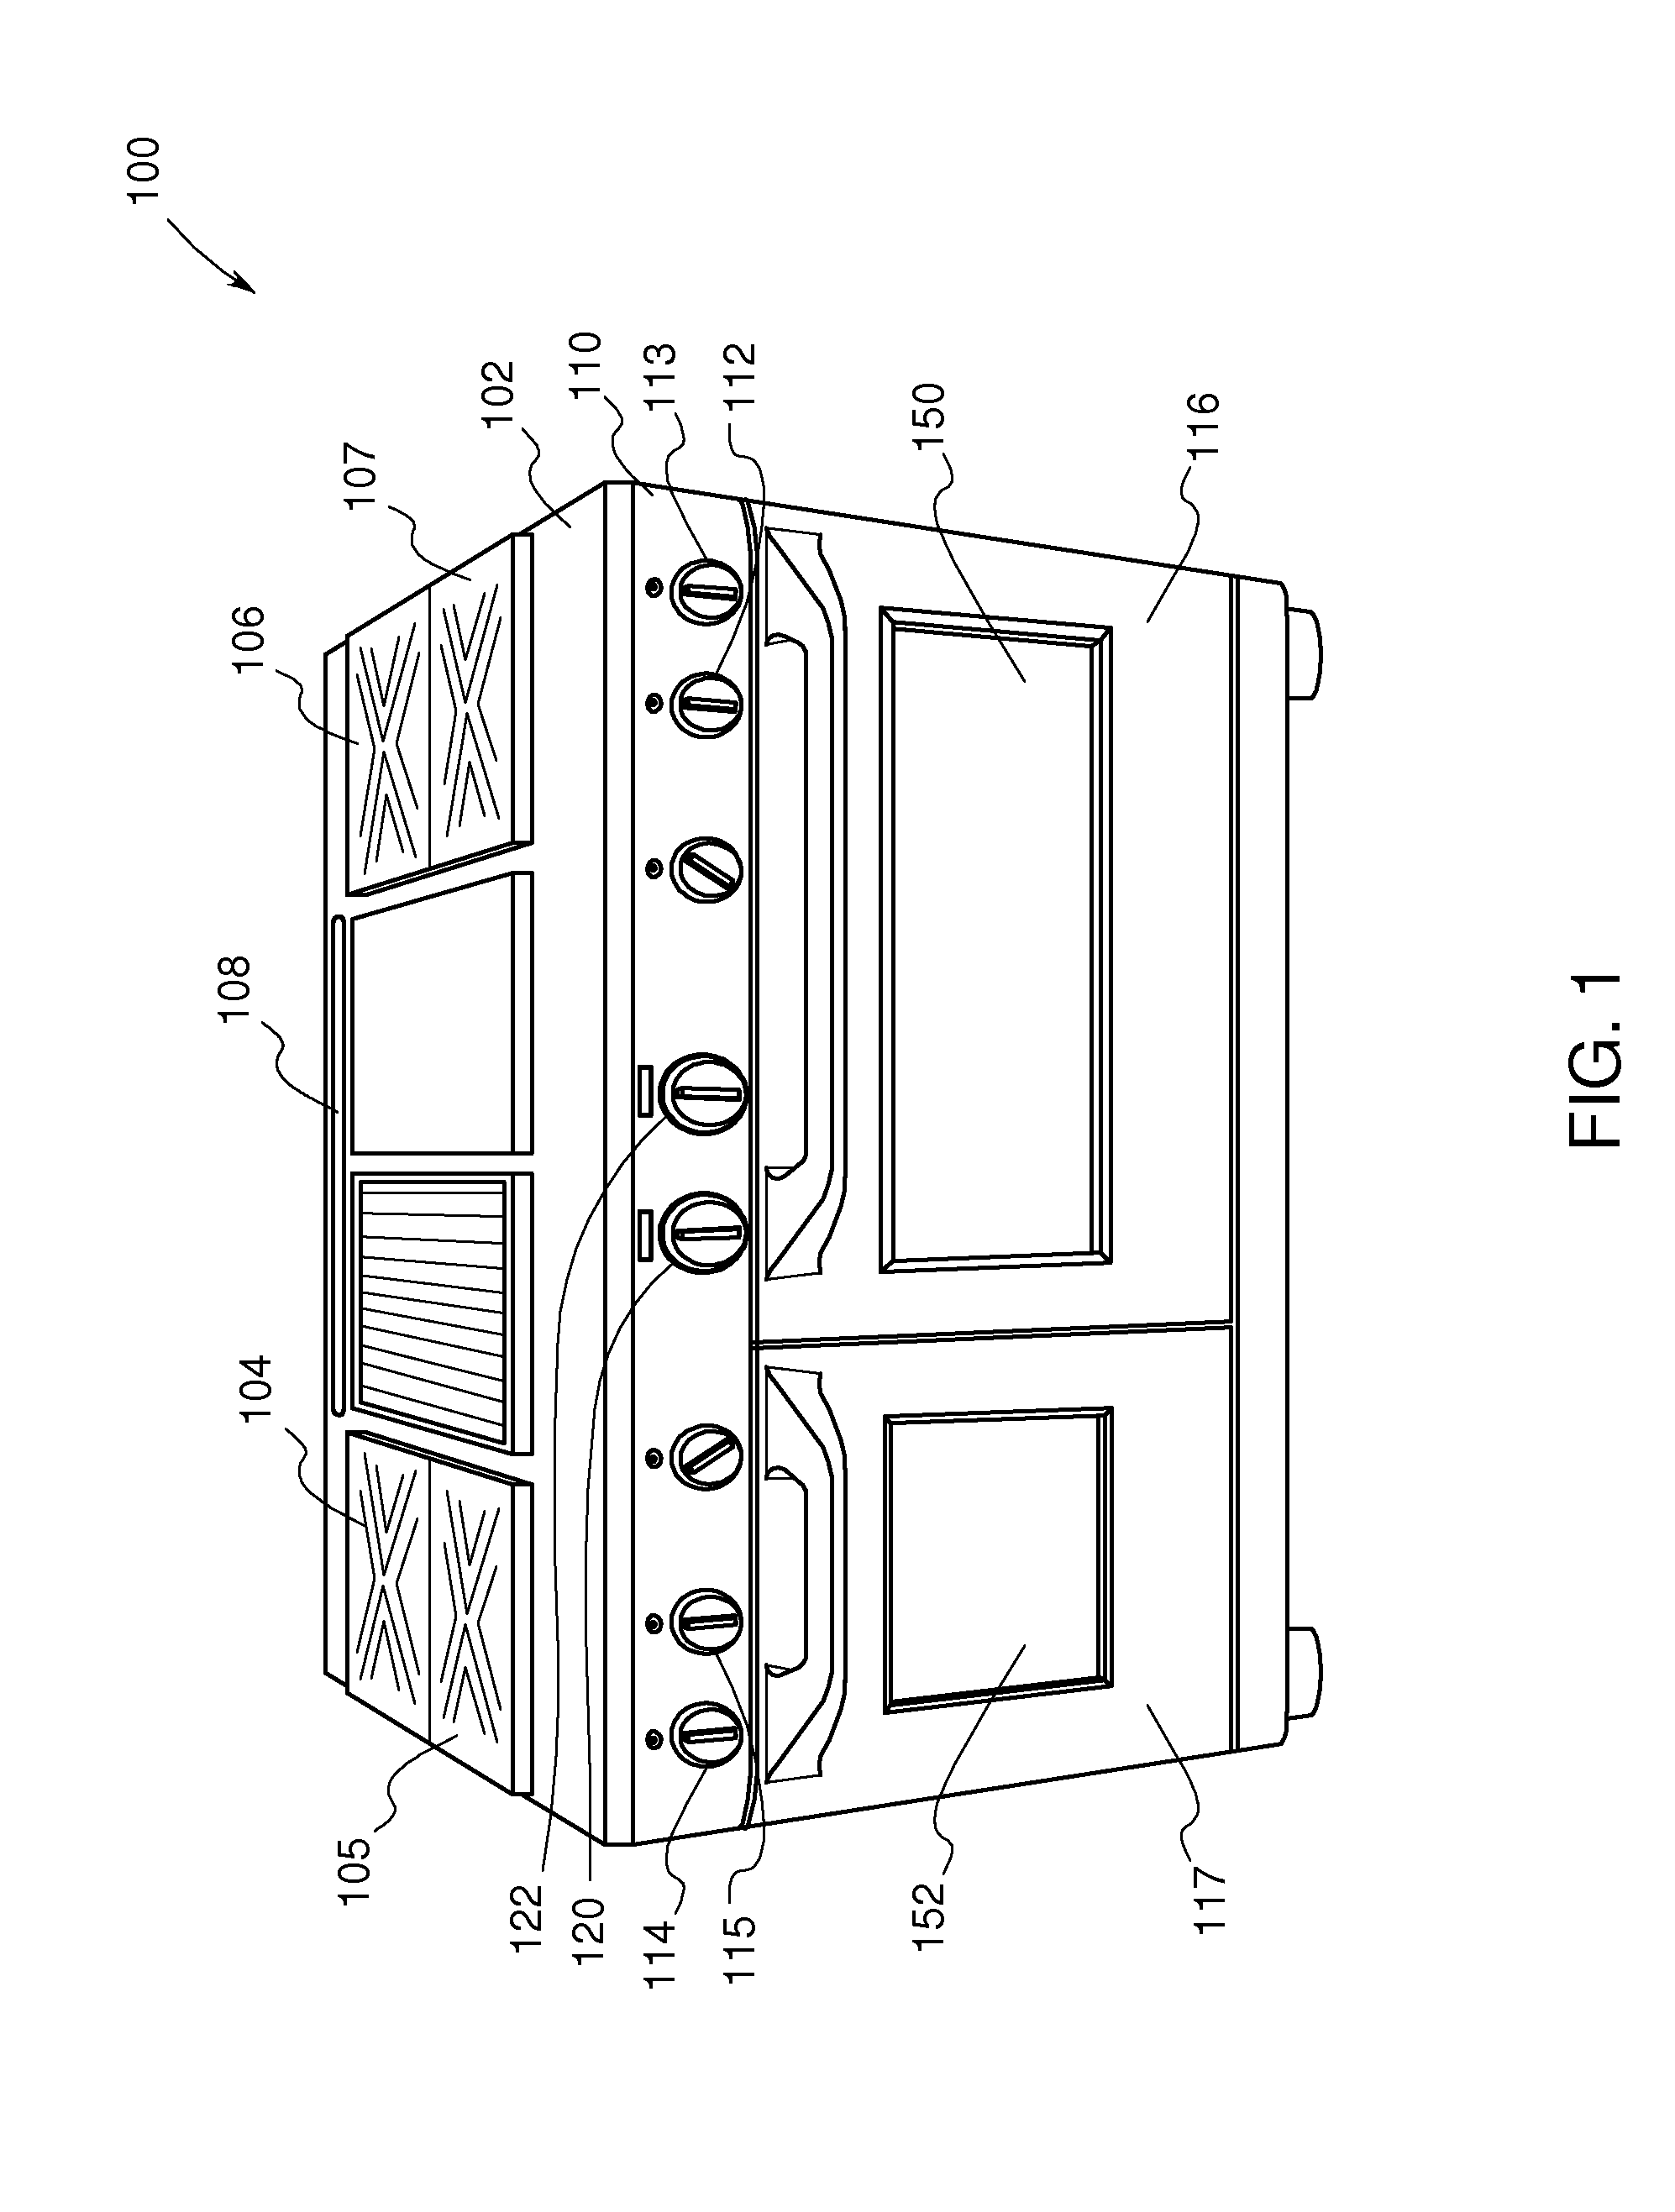 Control system for an appliance